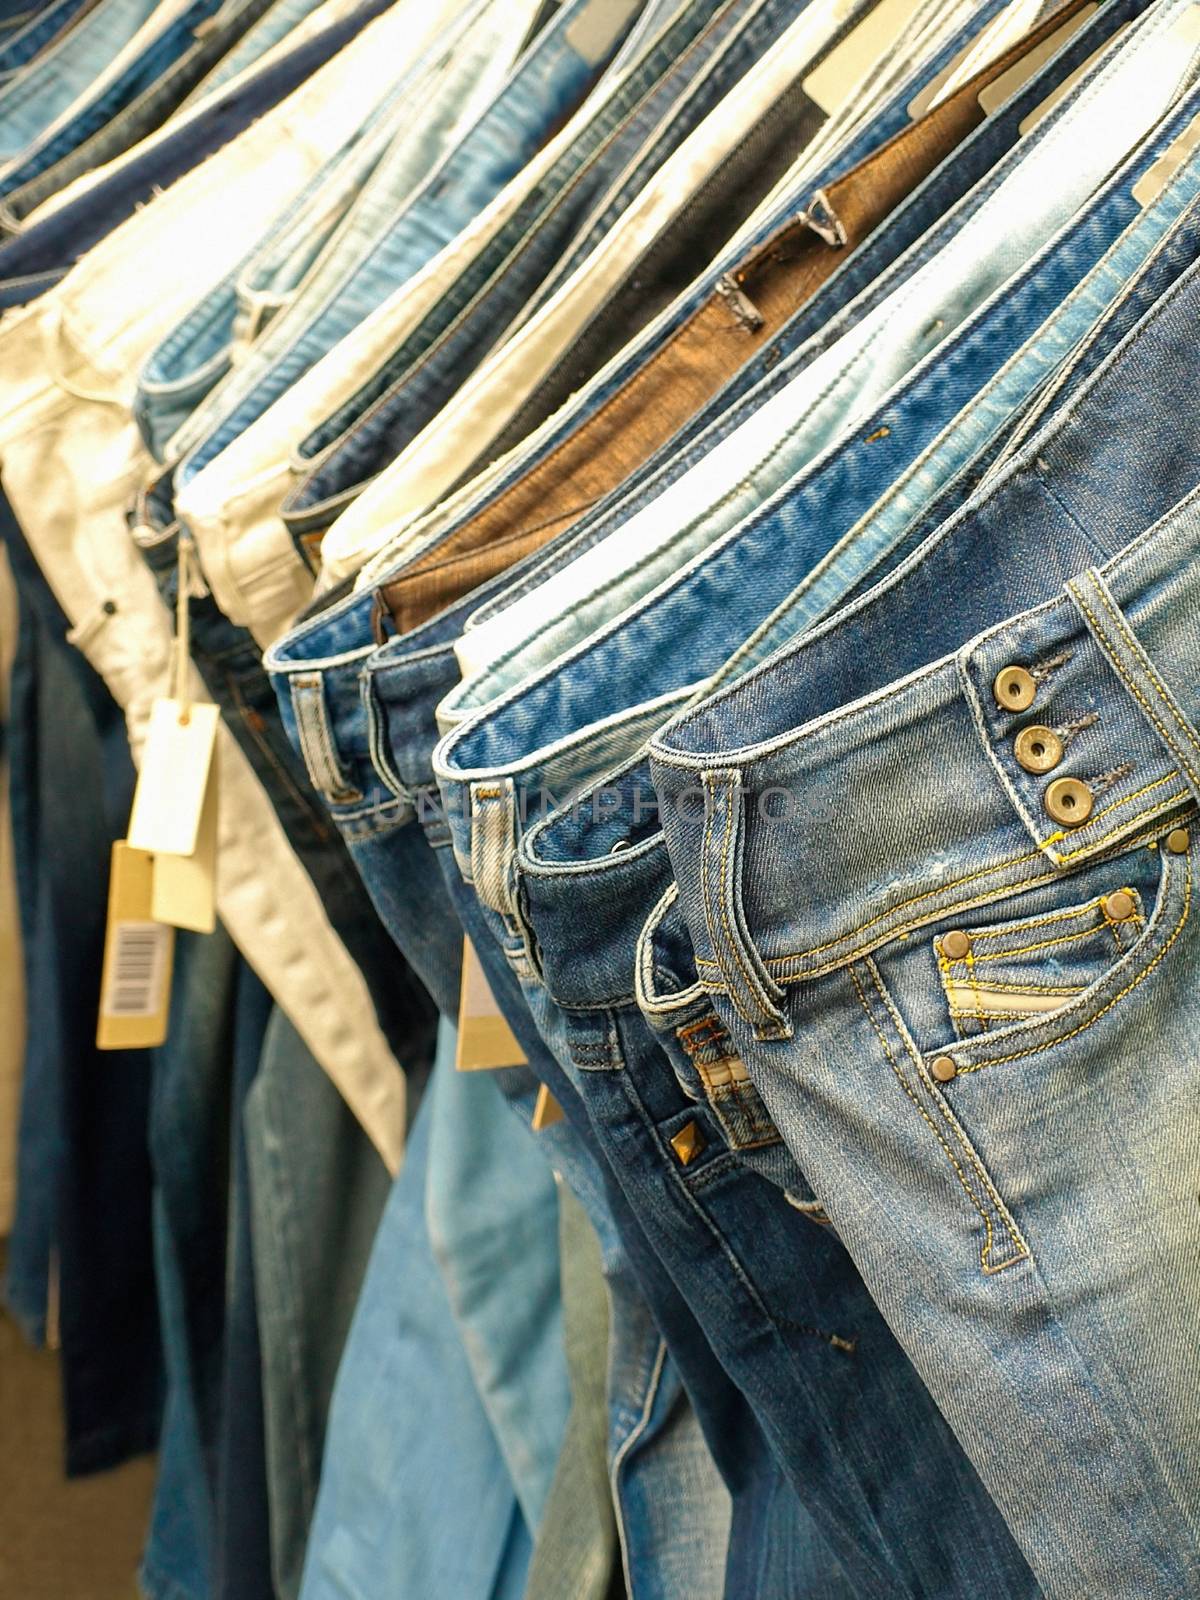 Row of hanged blue jeans in a shop.